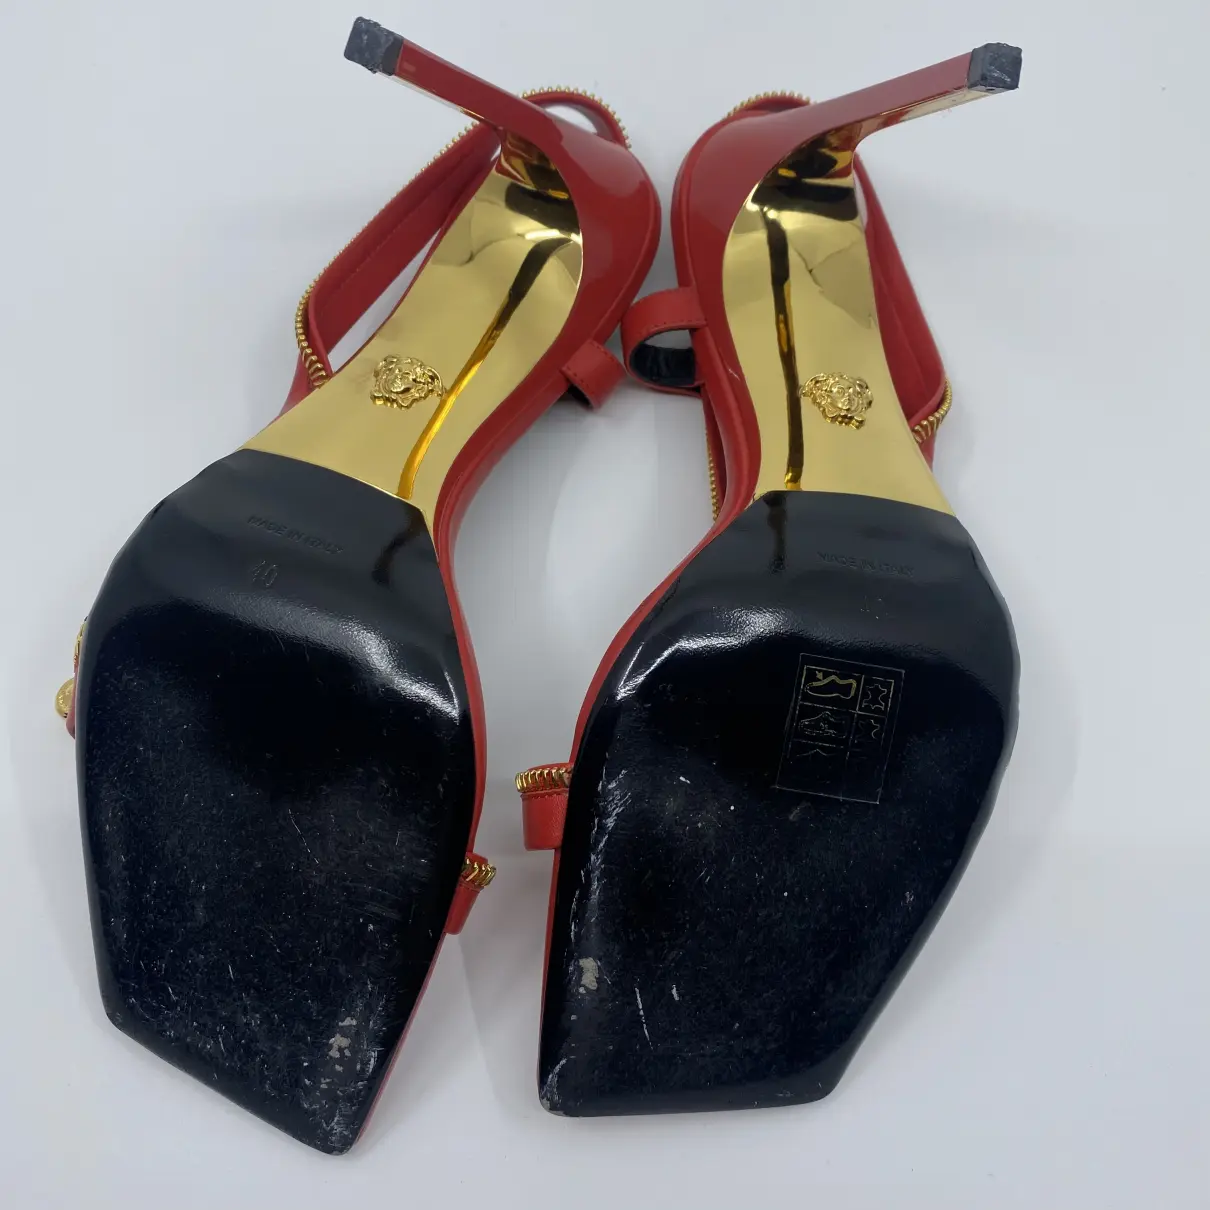 Second hand Shoes Women